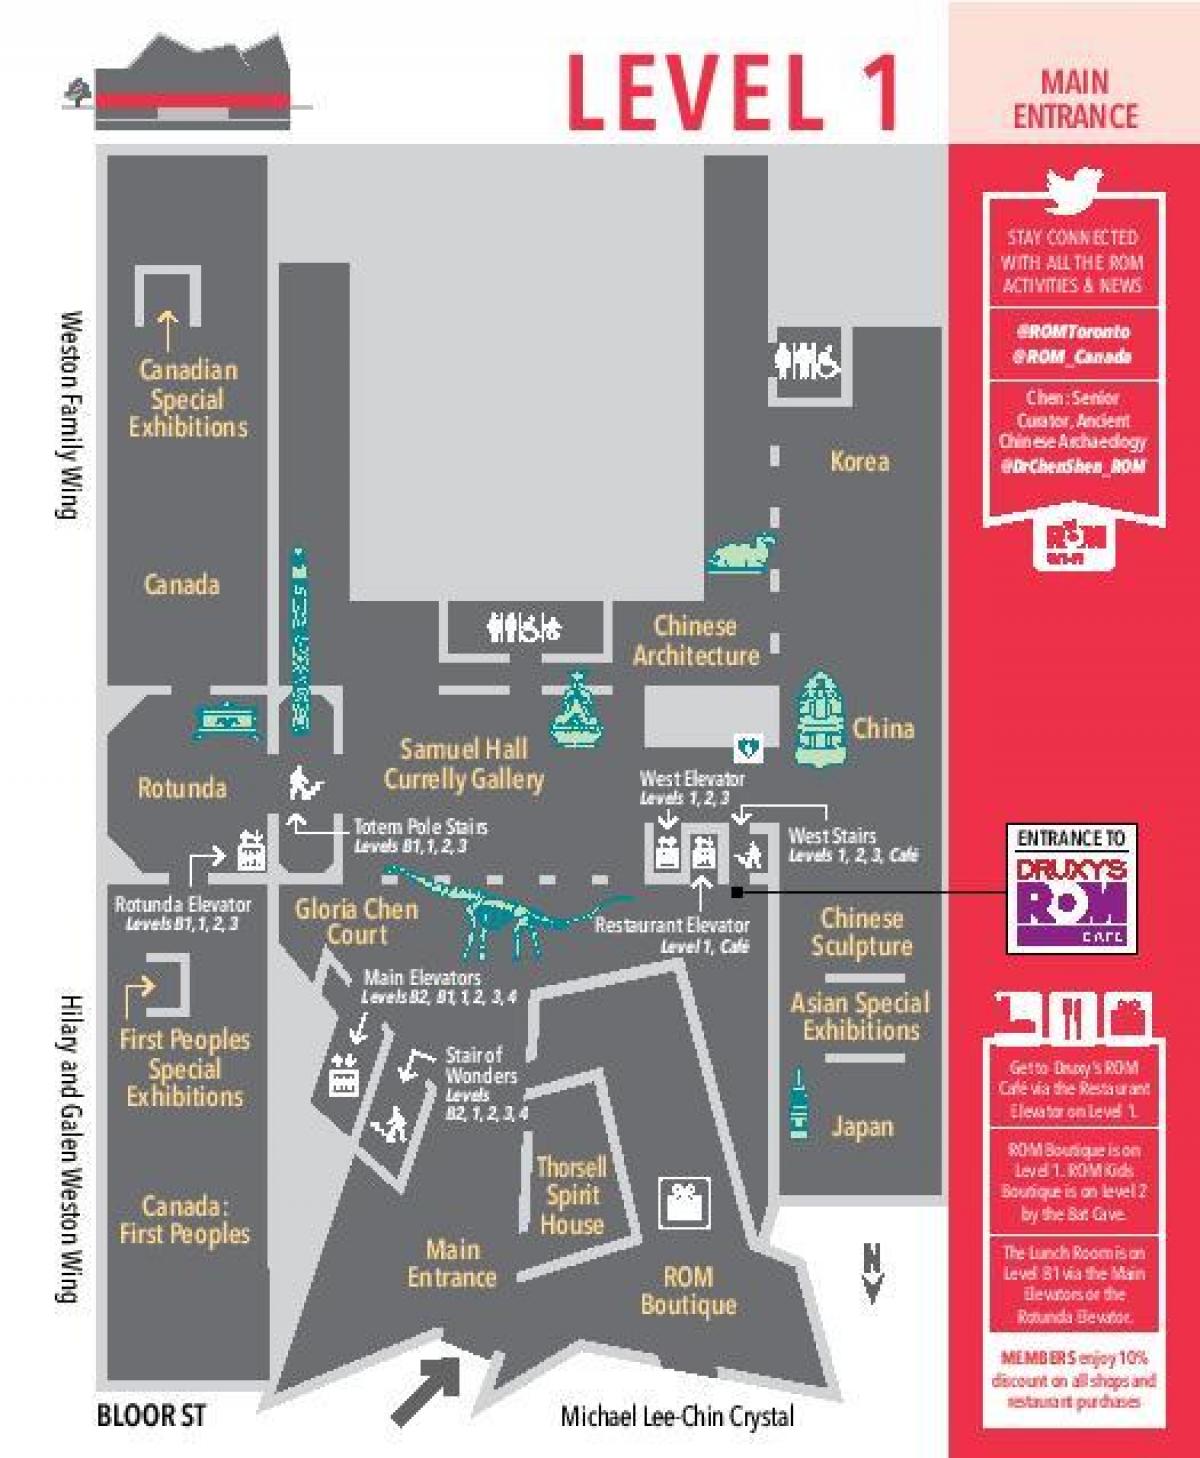 Map of Royal Ontario Museum level 1